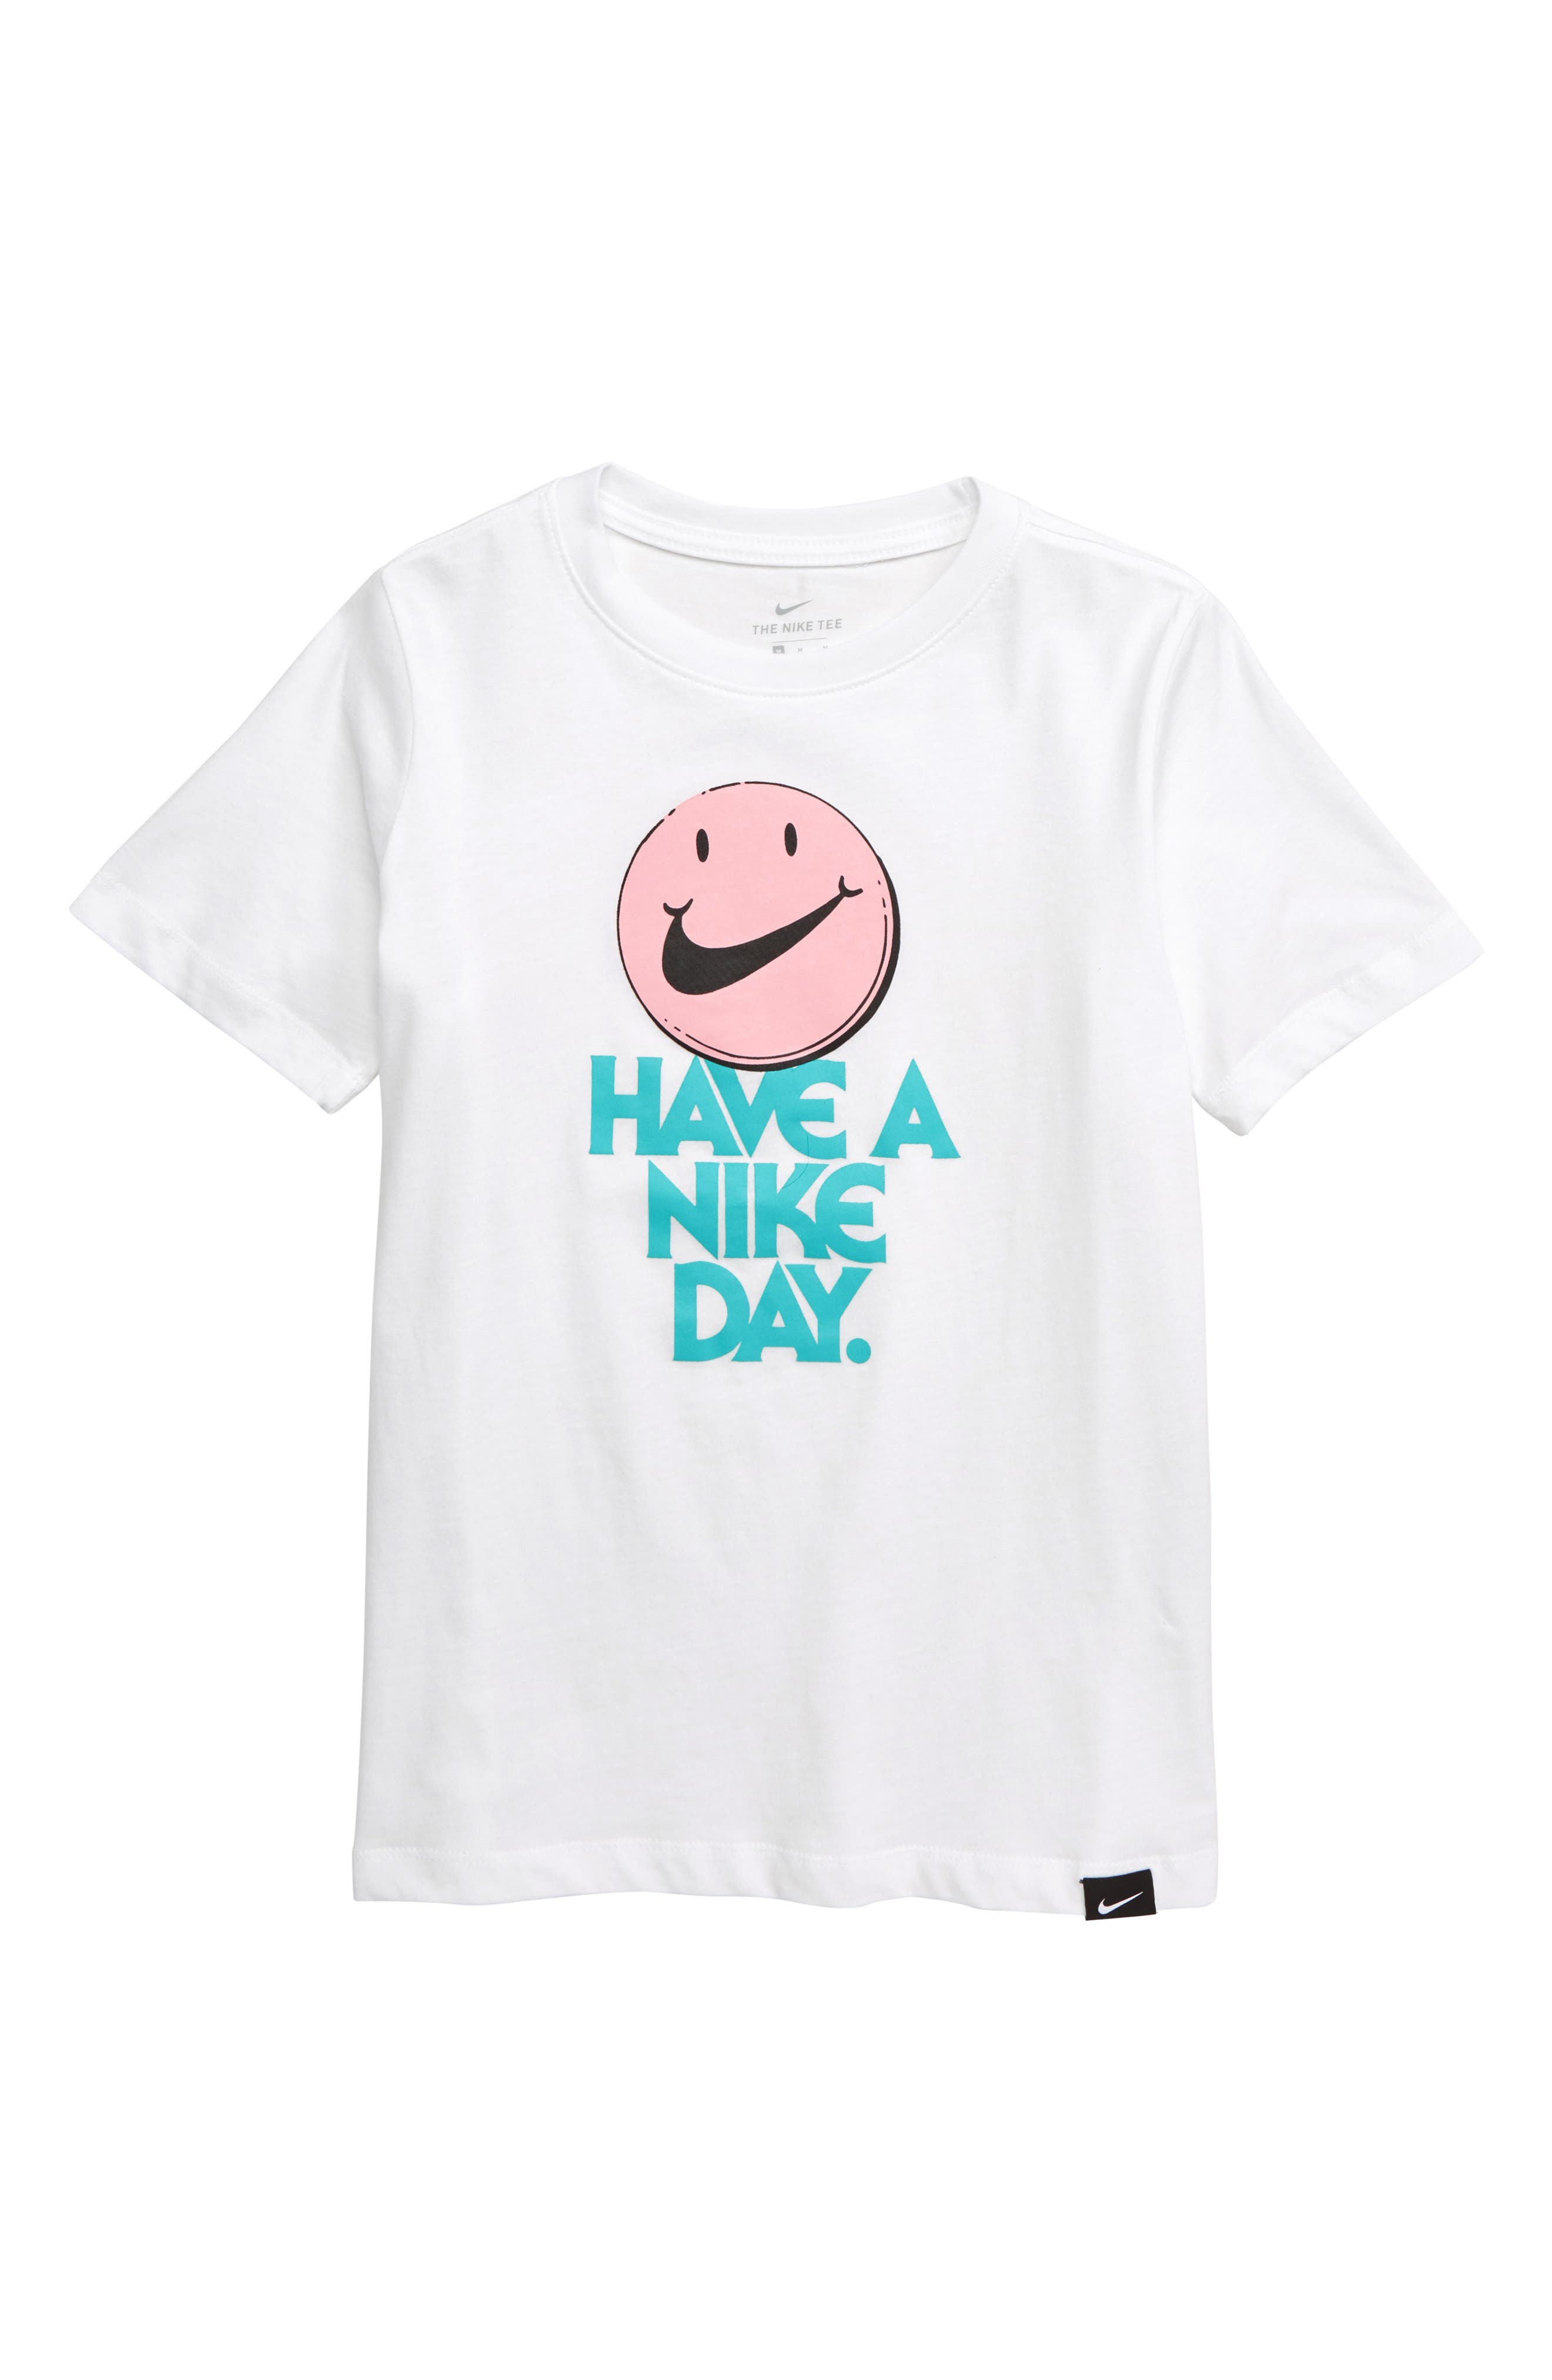 have a nike day tee shirt